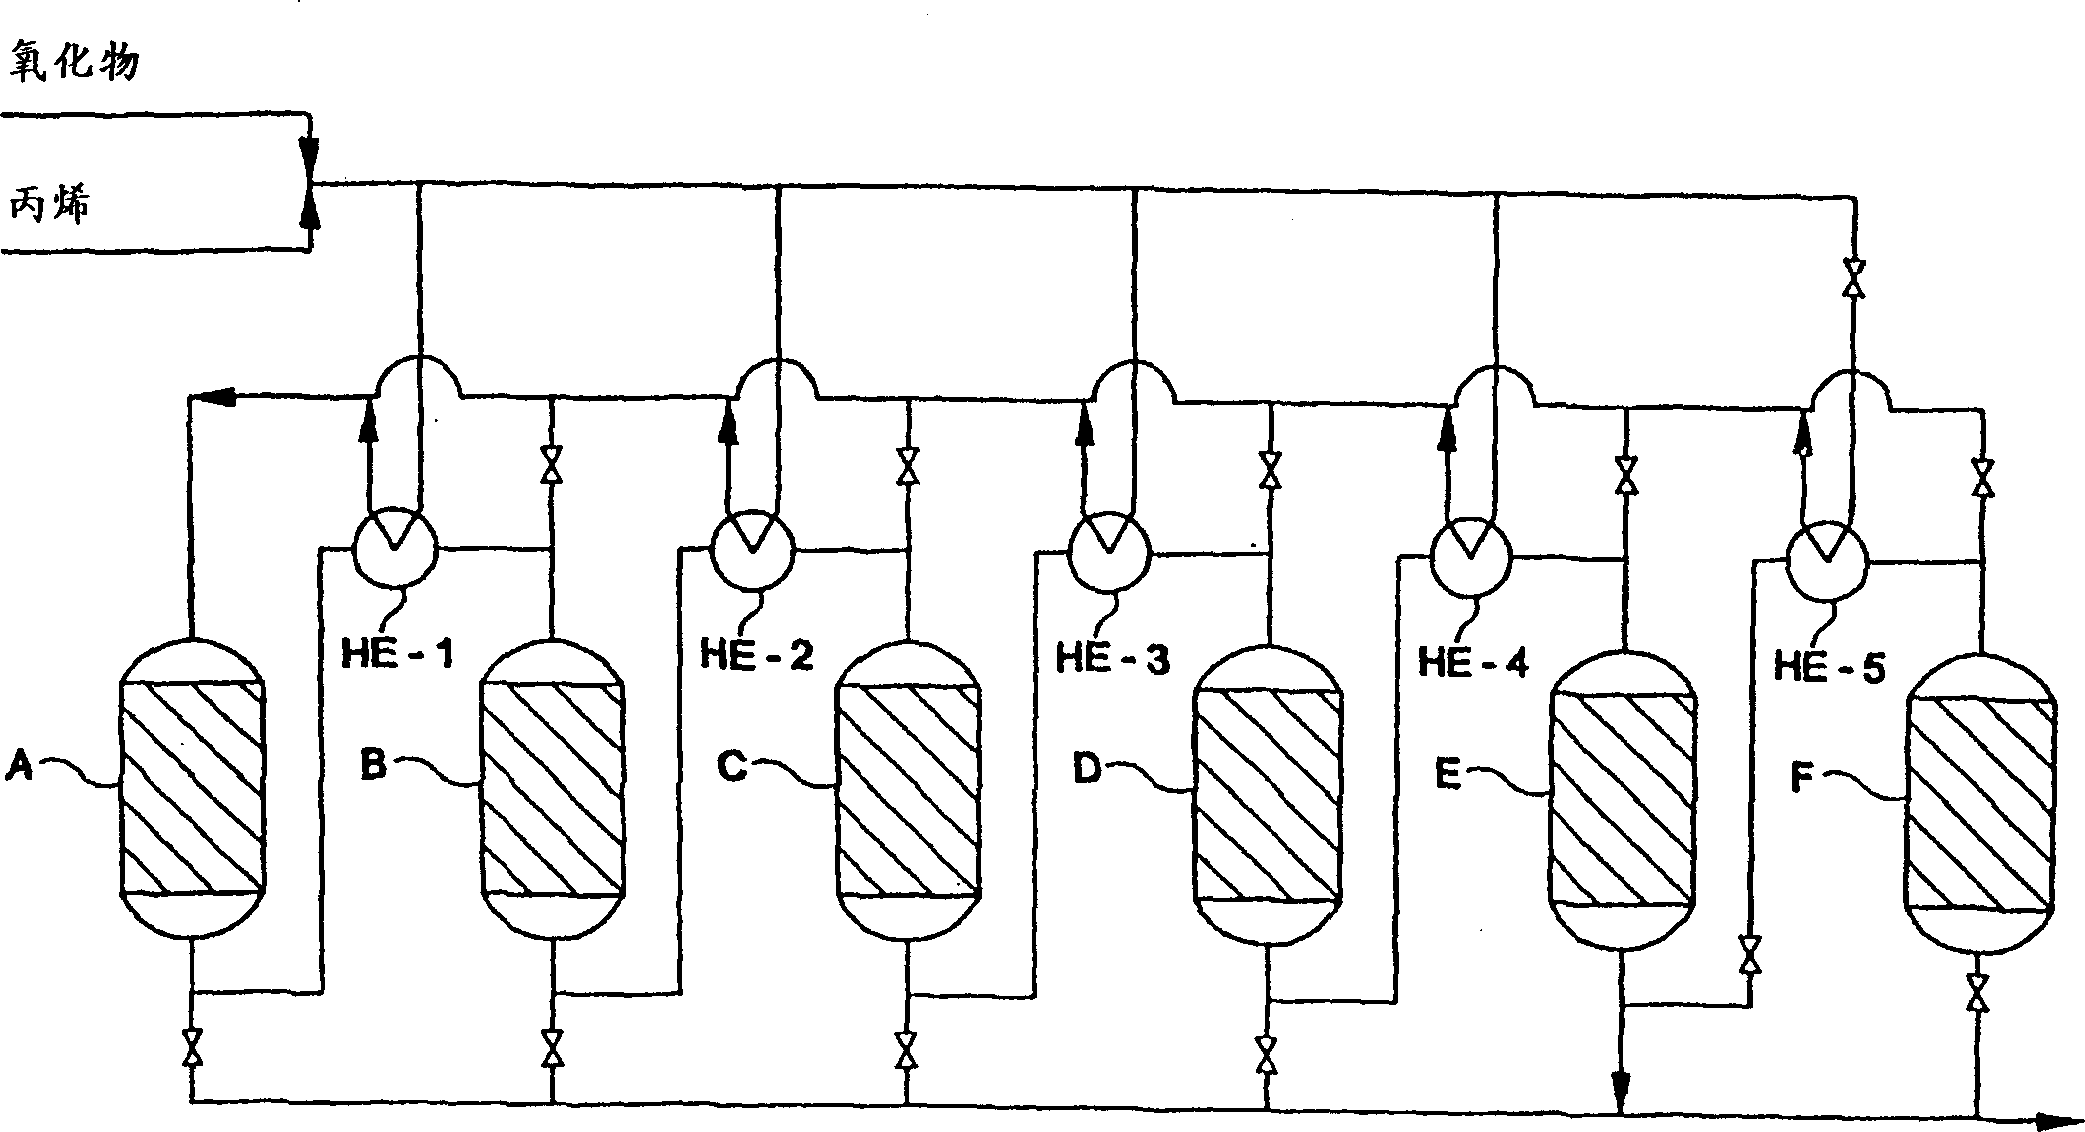 Epoxidation process using serially connected cascade of fixed bed reactors